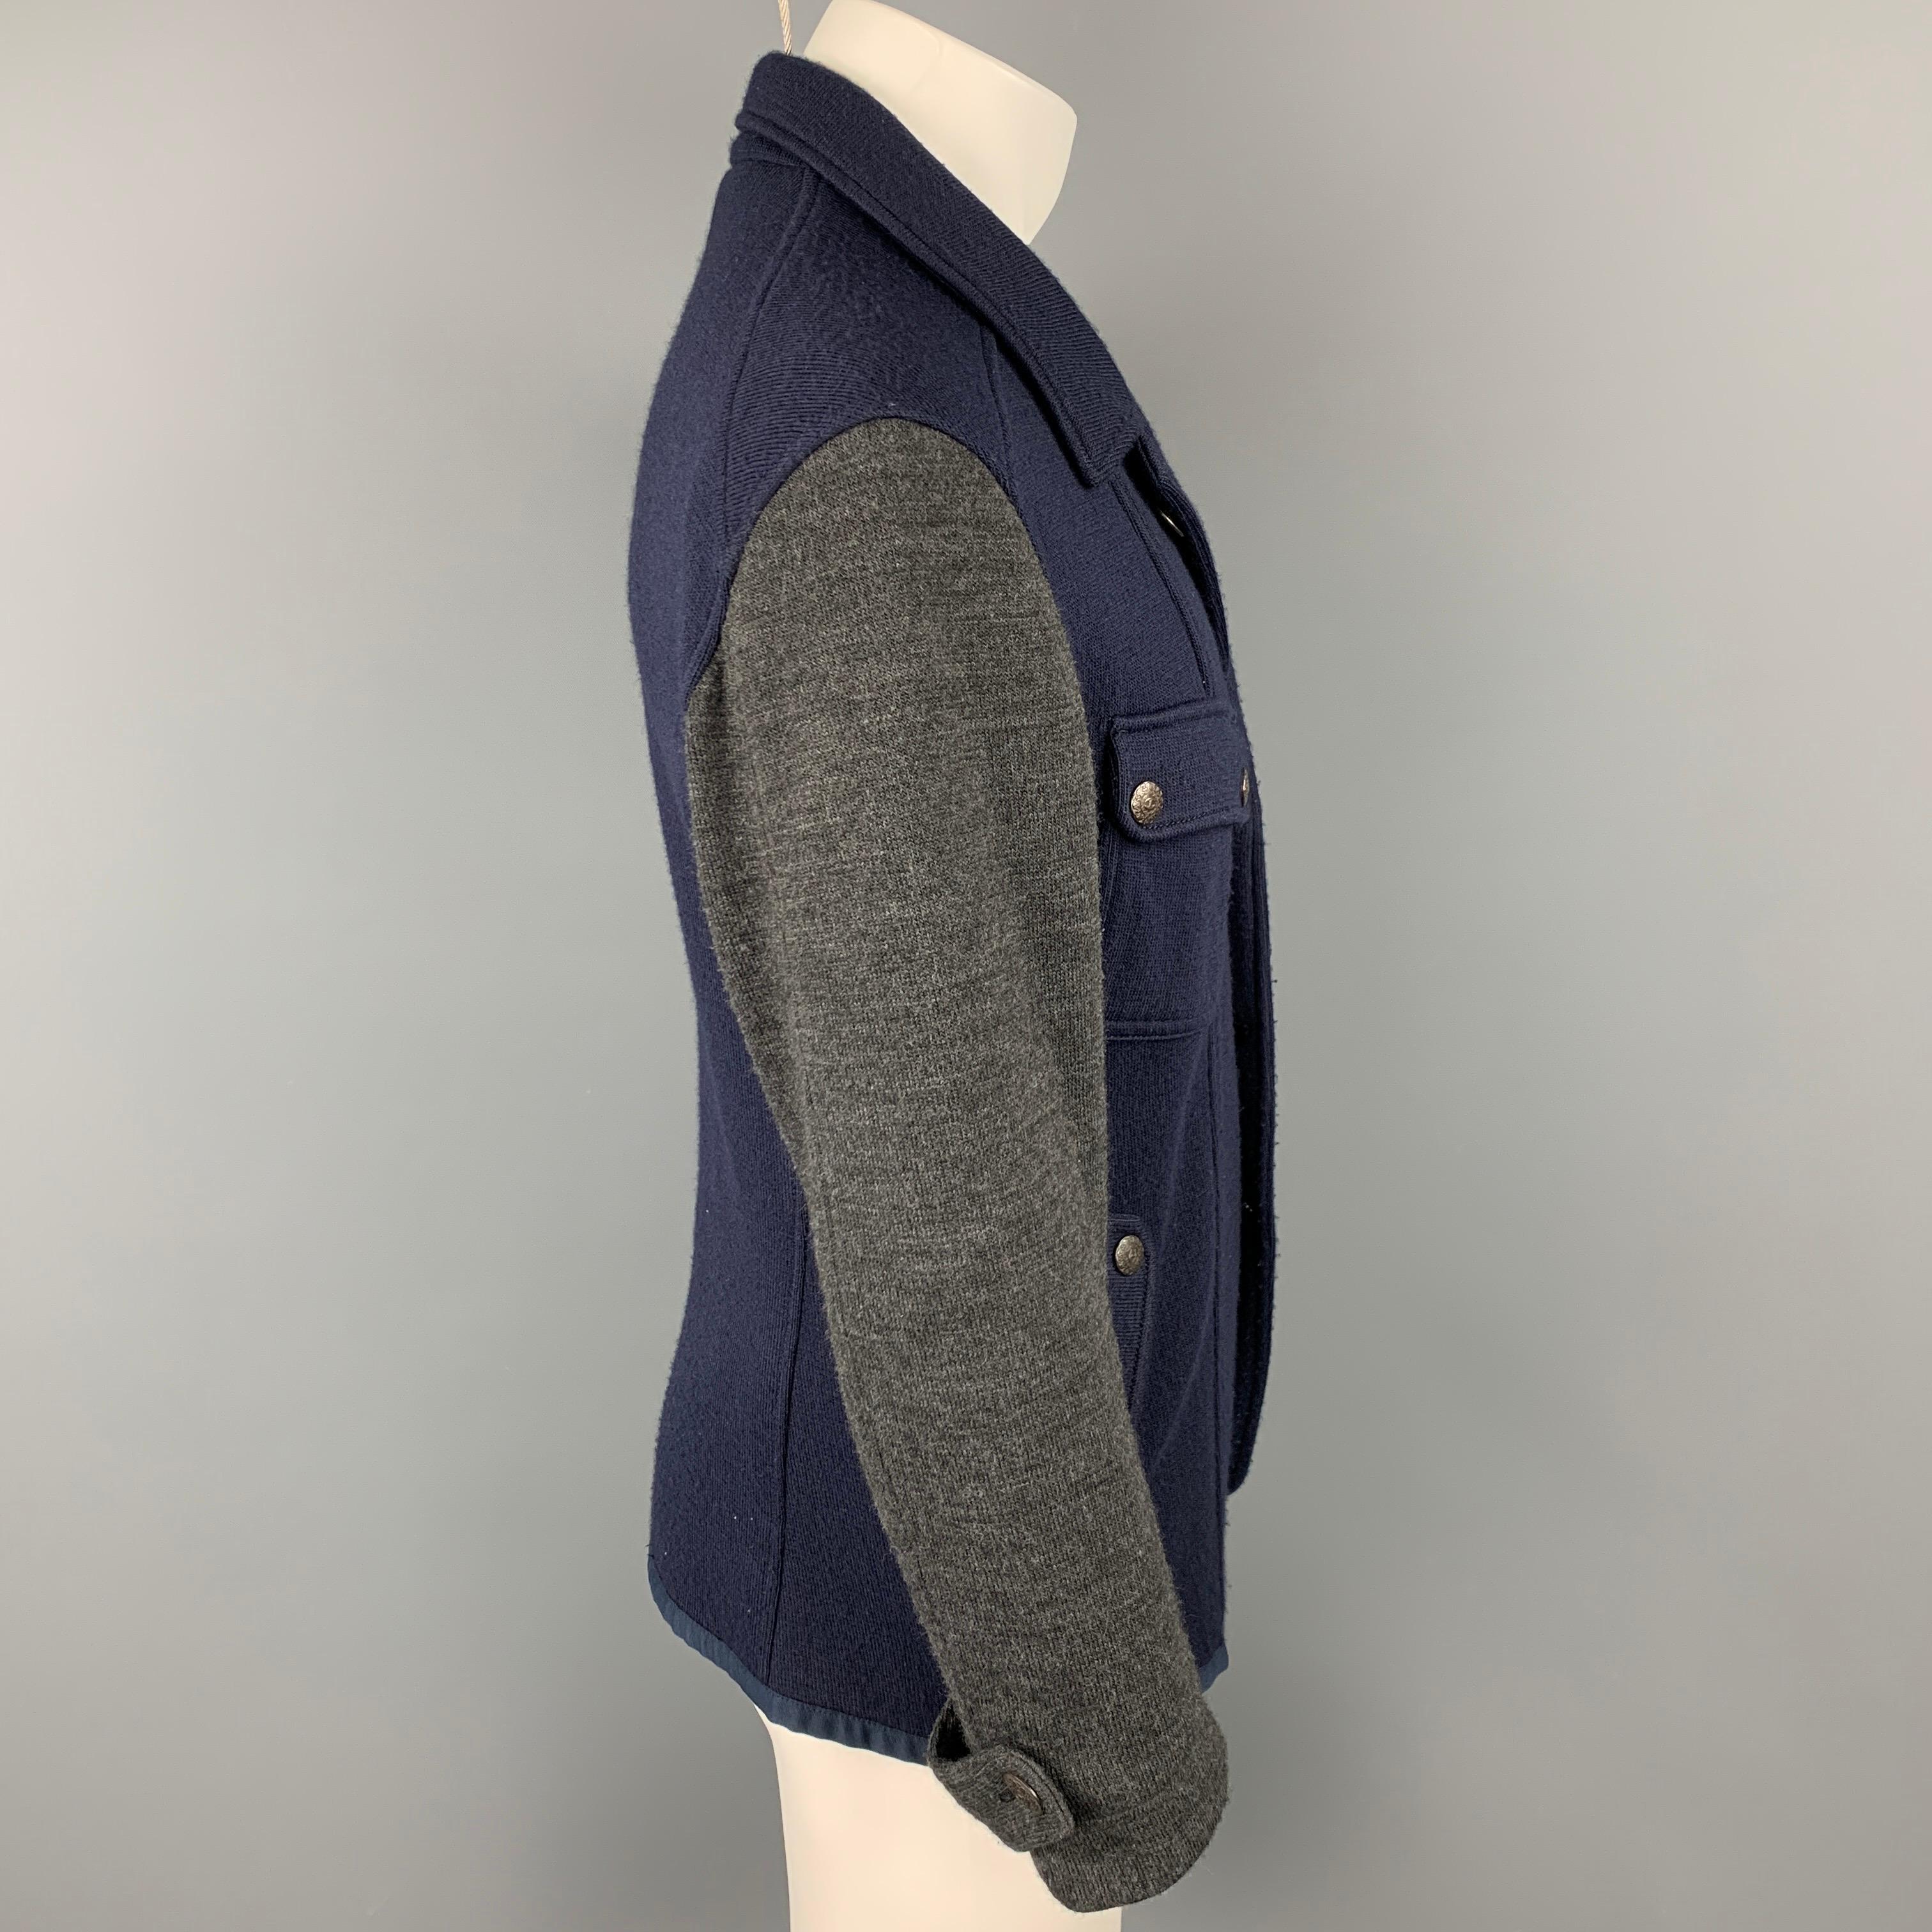 JUST CAVALLI jacket comes in a navy & grey color block knitted material featuring spread collar, flap pockets, and a metal button closure. 

Very Good Pre-Owned Condition.
Marked: 52

Measurements:

Shoulder: 20.5 in.
Chest: 44 in.
Sleeve: 23.5